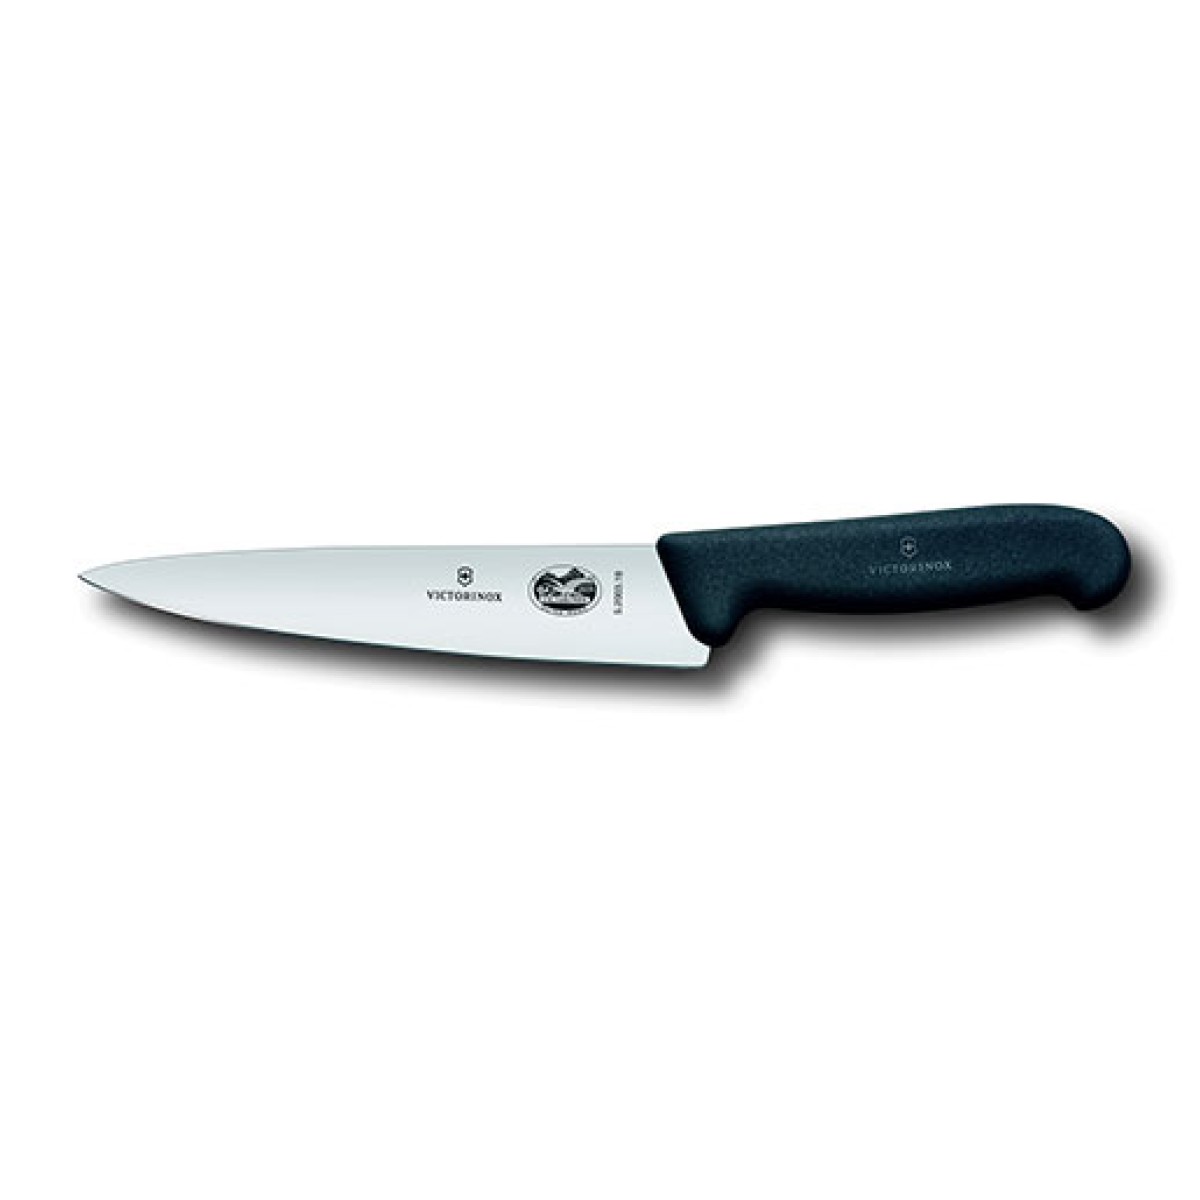 KNIFE VICTORINOX CARVING 52003-19